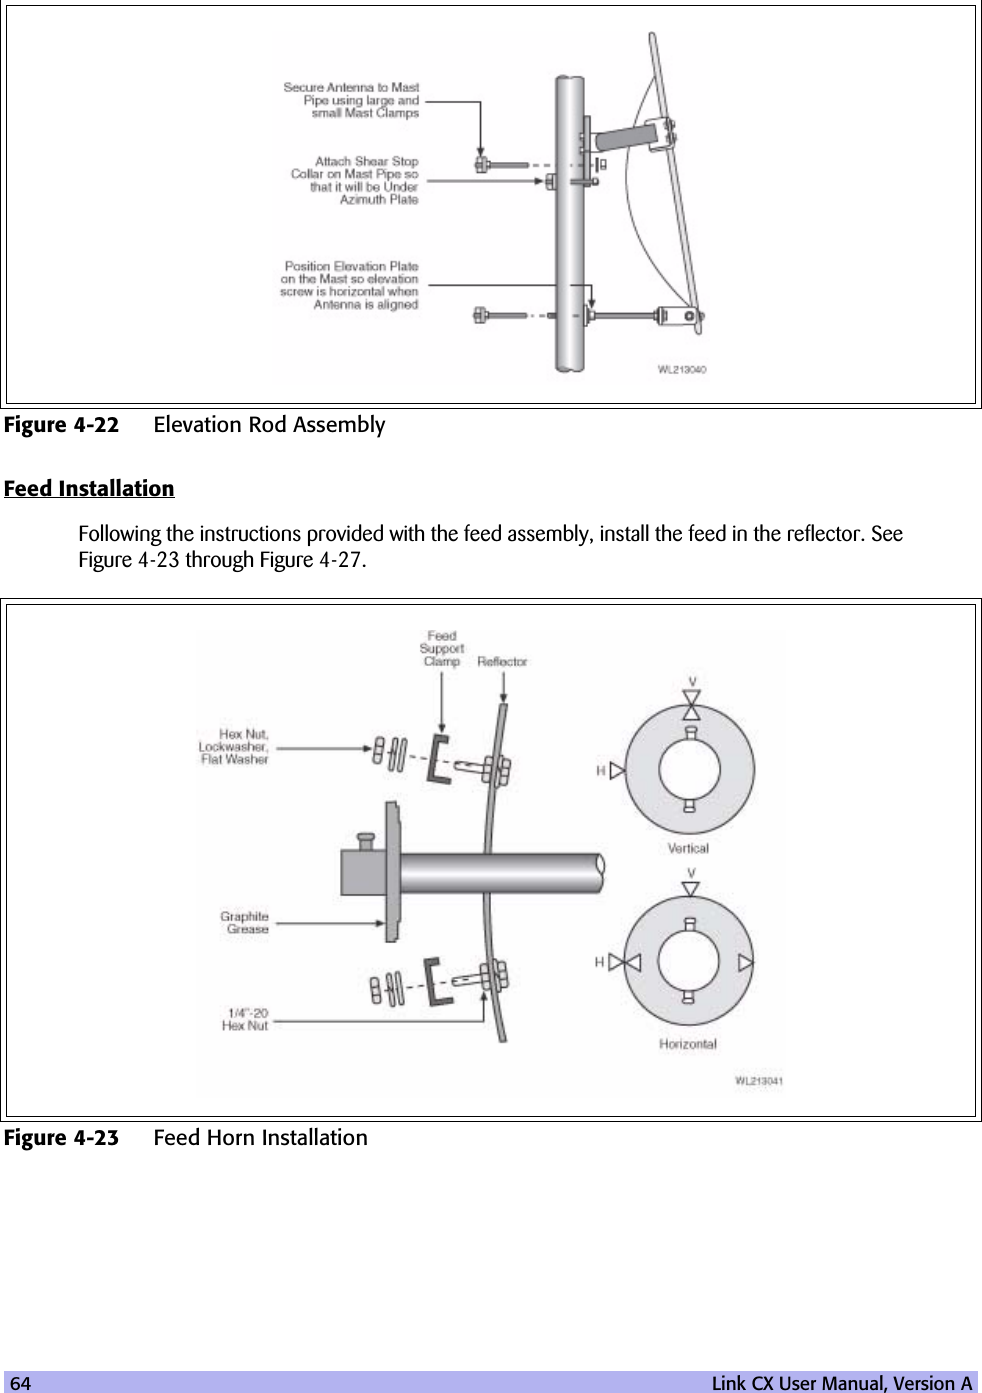 64   Link CX User Manual, Version AFeed InstallationFollowing the instructions provided with the feed assembly, install the feed in the reflector. See Figure 4-23 through Figure 4-27.Figure 4-22 Elevation Rod AssemblyFigure 4-23 Feed Horn Installation